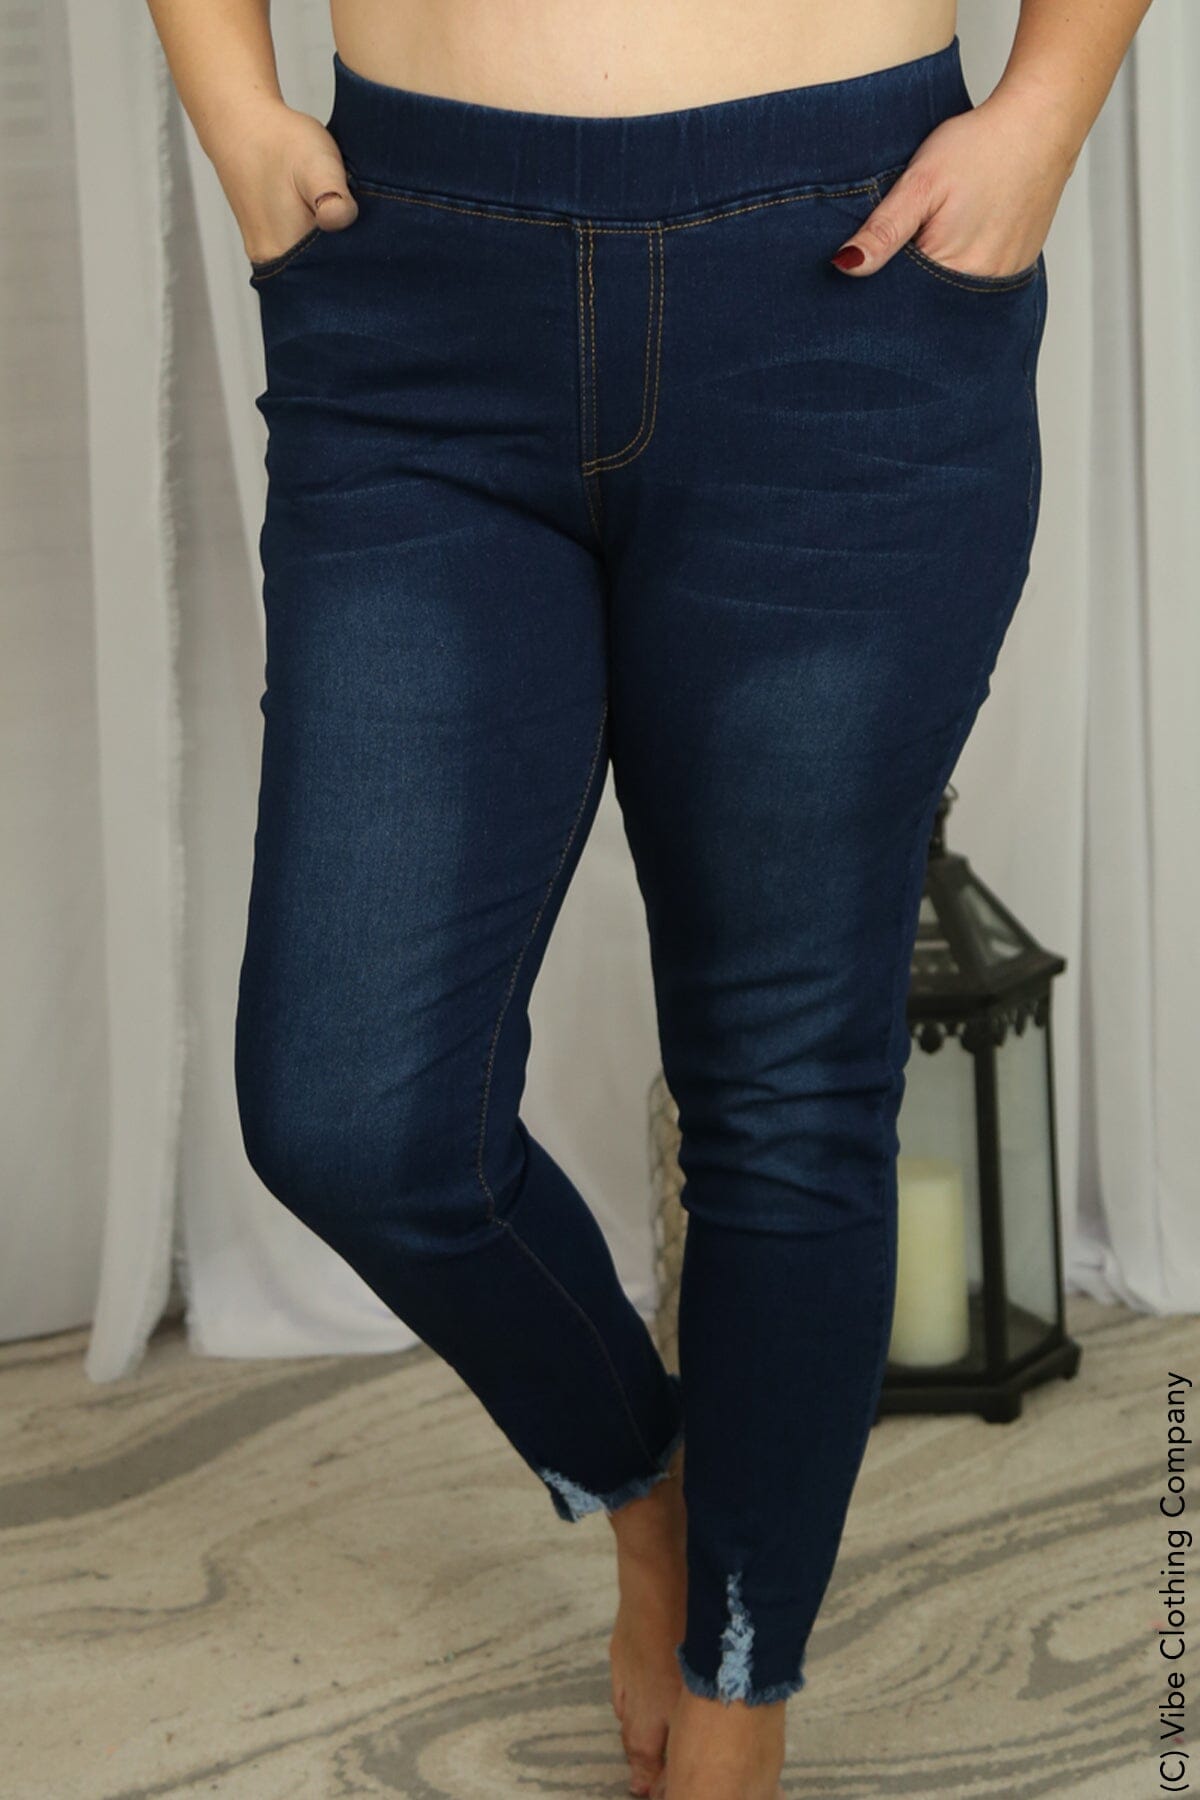 Caspian - 15th Distressed Skinnies by Vibe Clothing